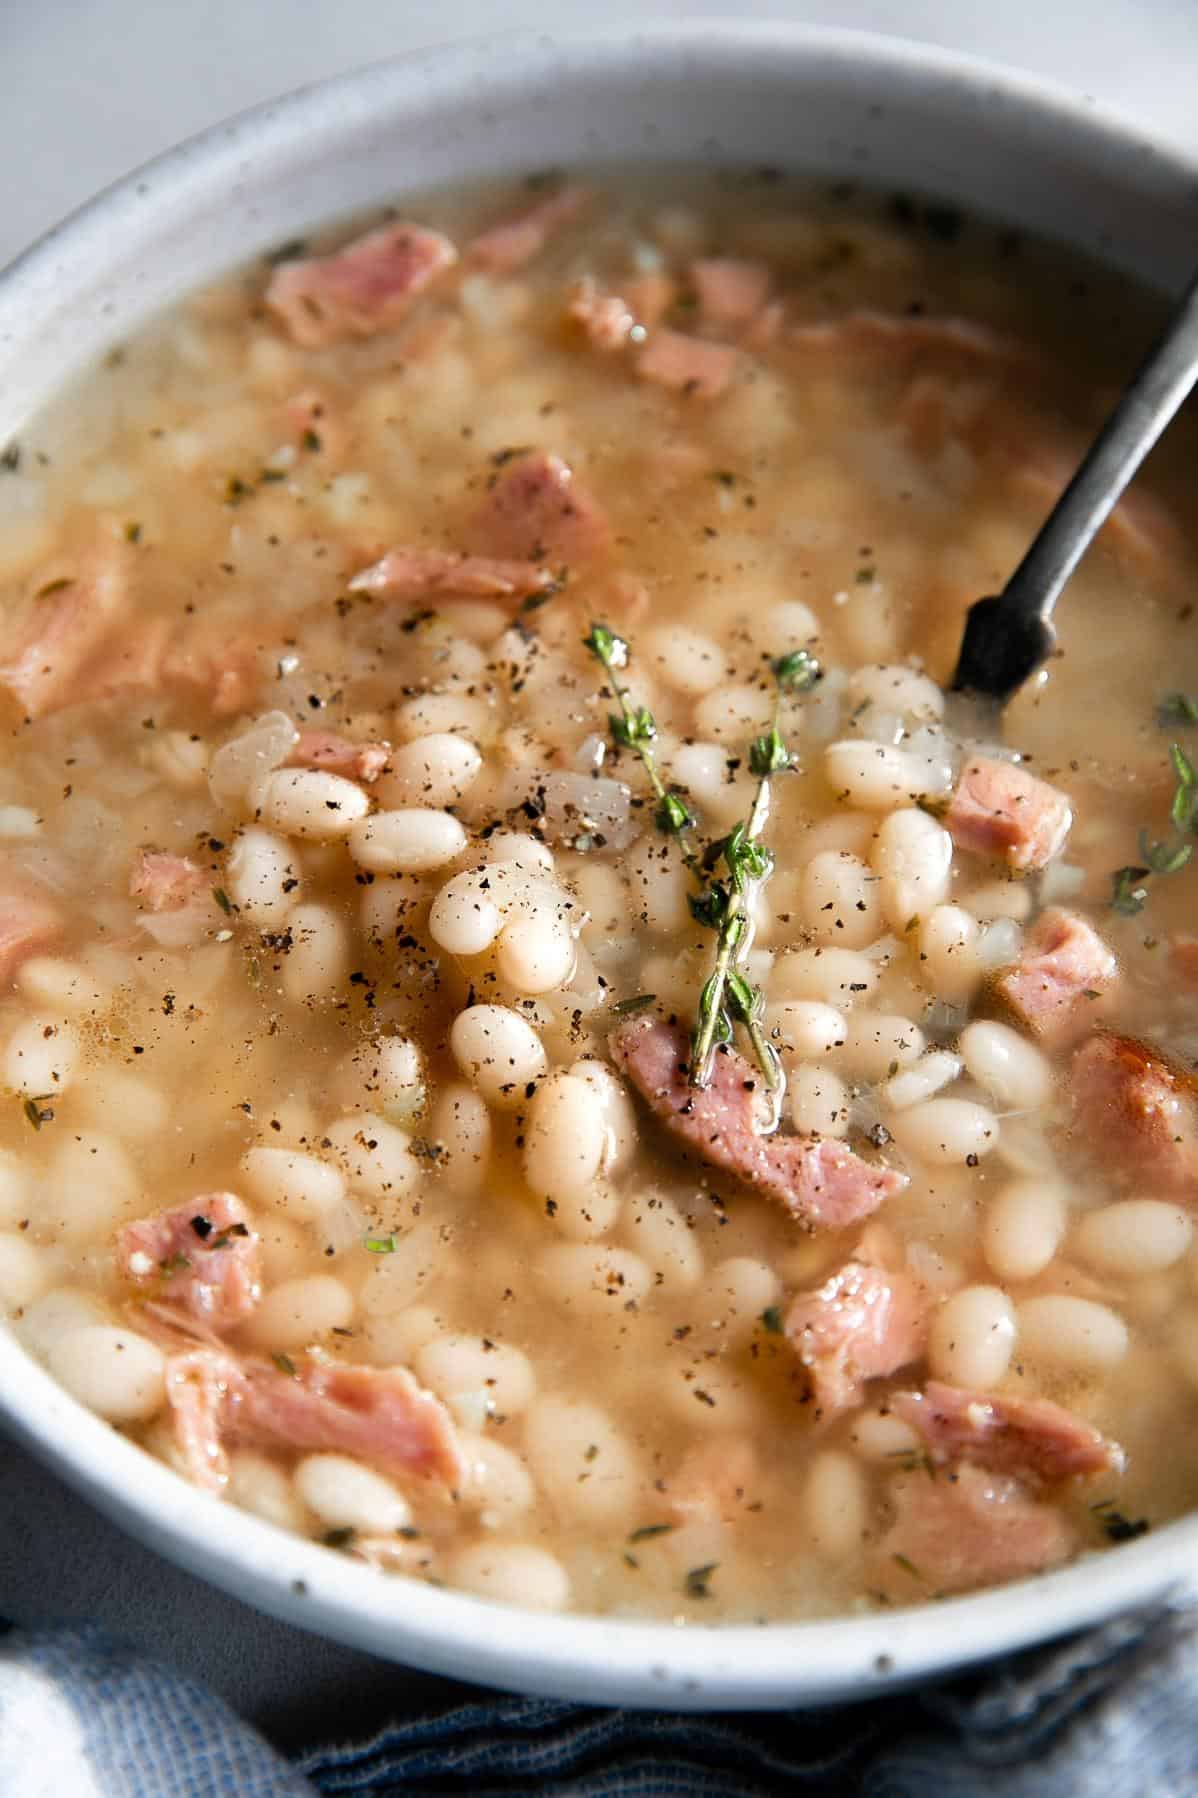  A comforting bowl of Rudy's Navy Bean Soup with Ham to warm you up on a chilly day.